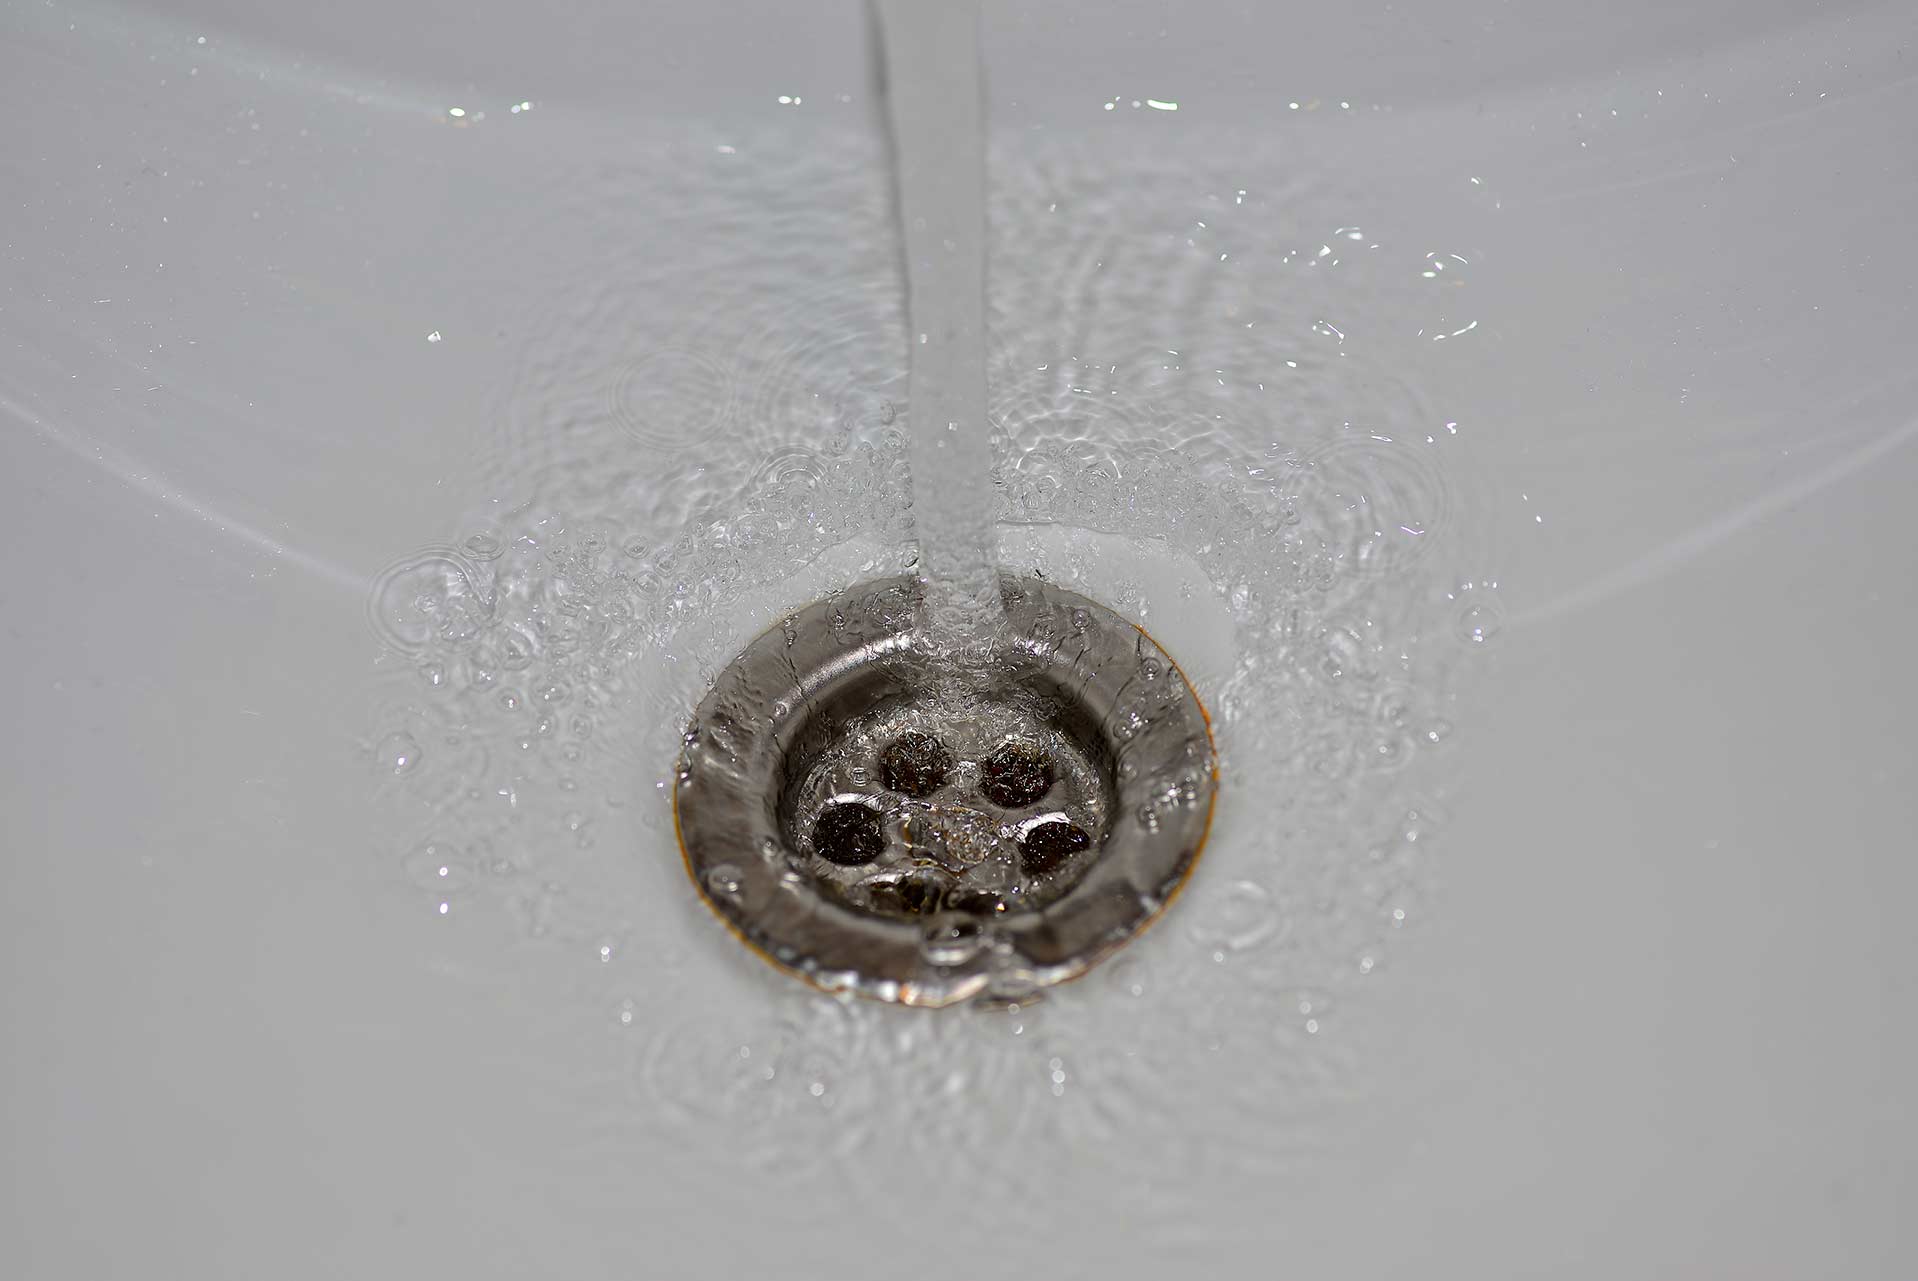 A2B Drains provides services to unblock blocked sinks and drains for properties in Balham.